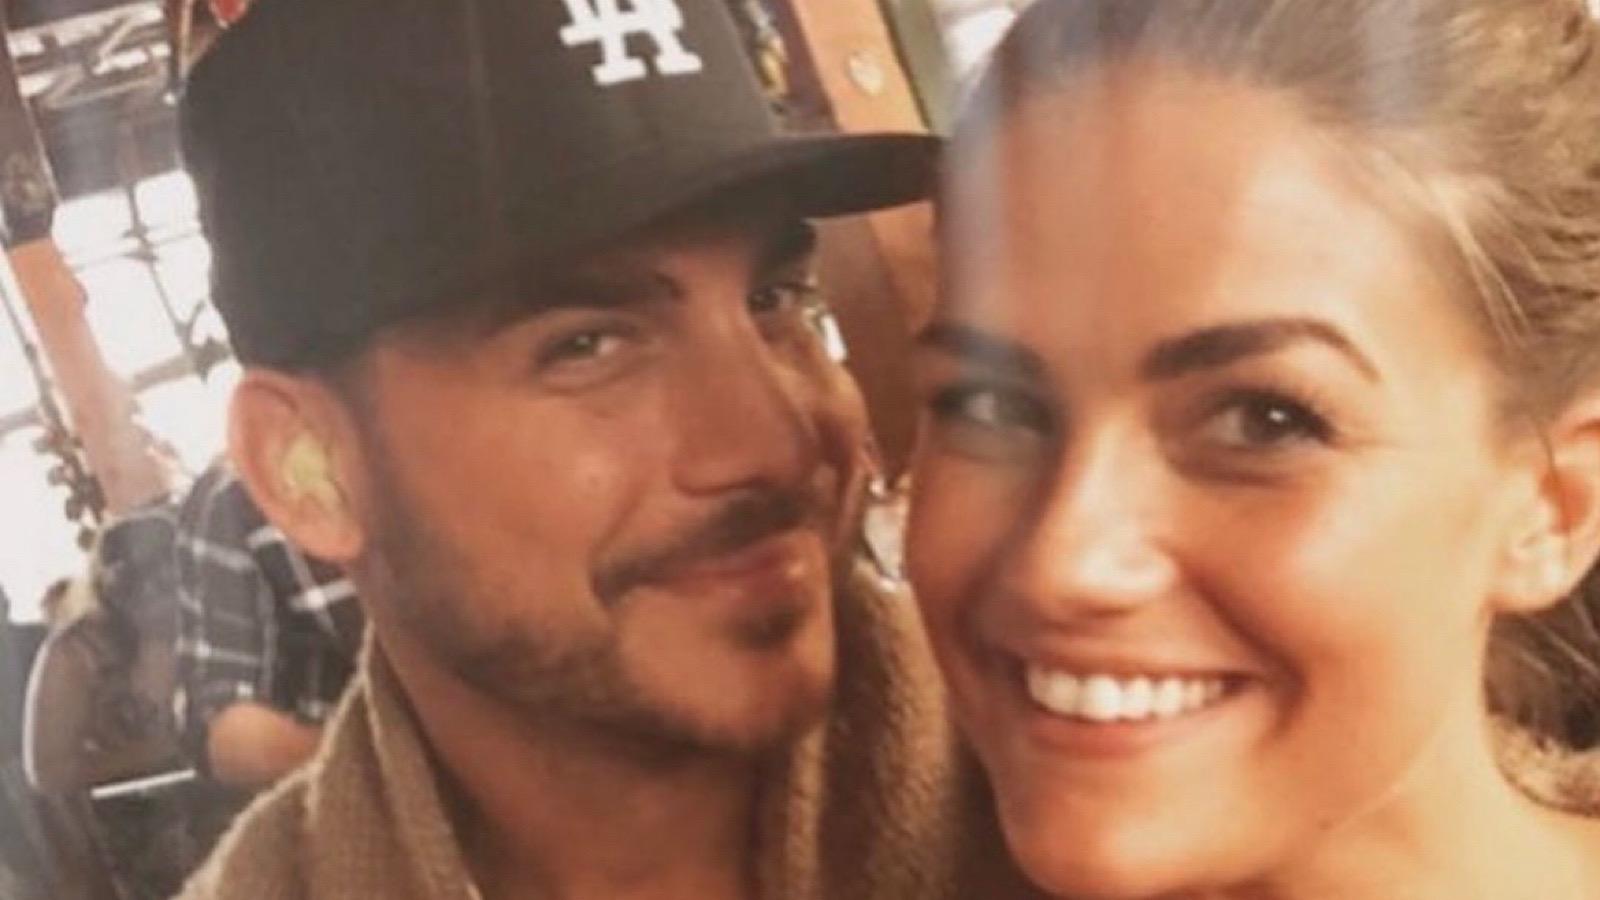 did jax and brittany breakup?